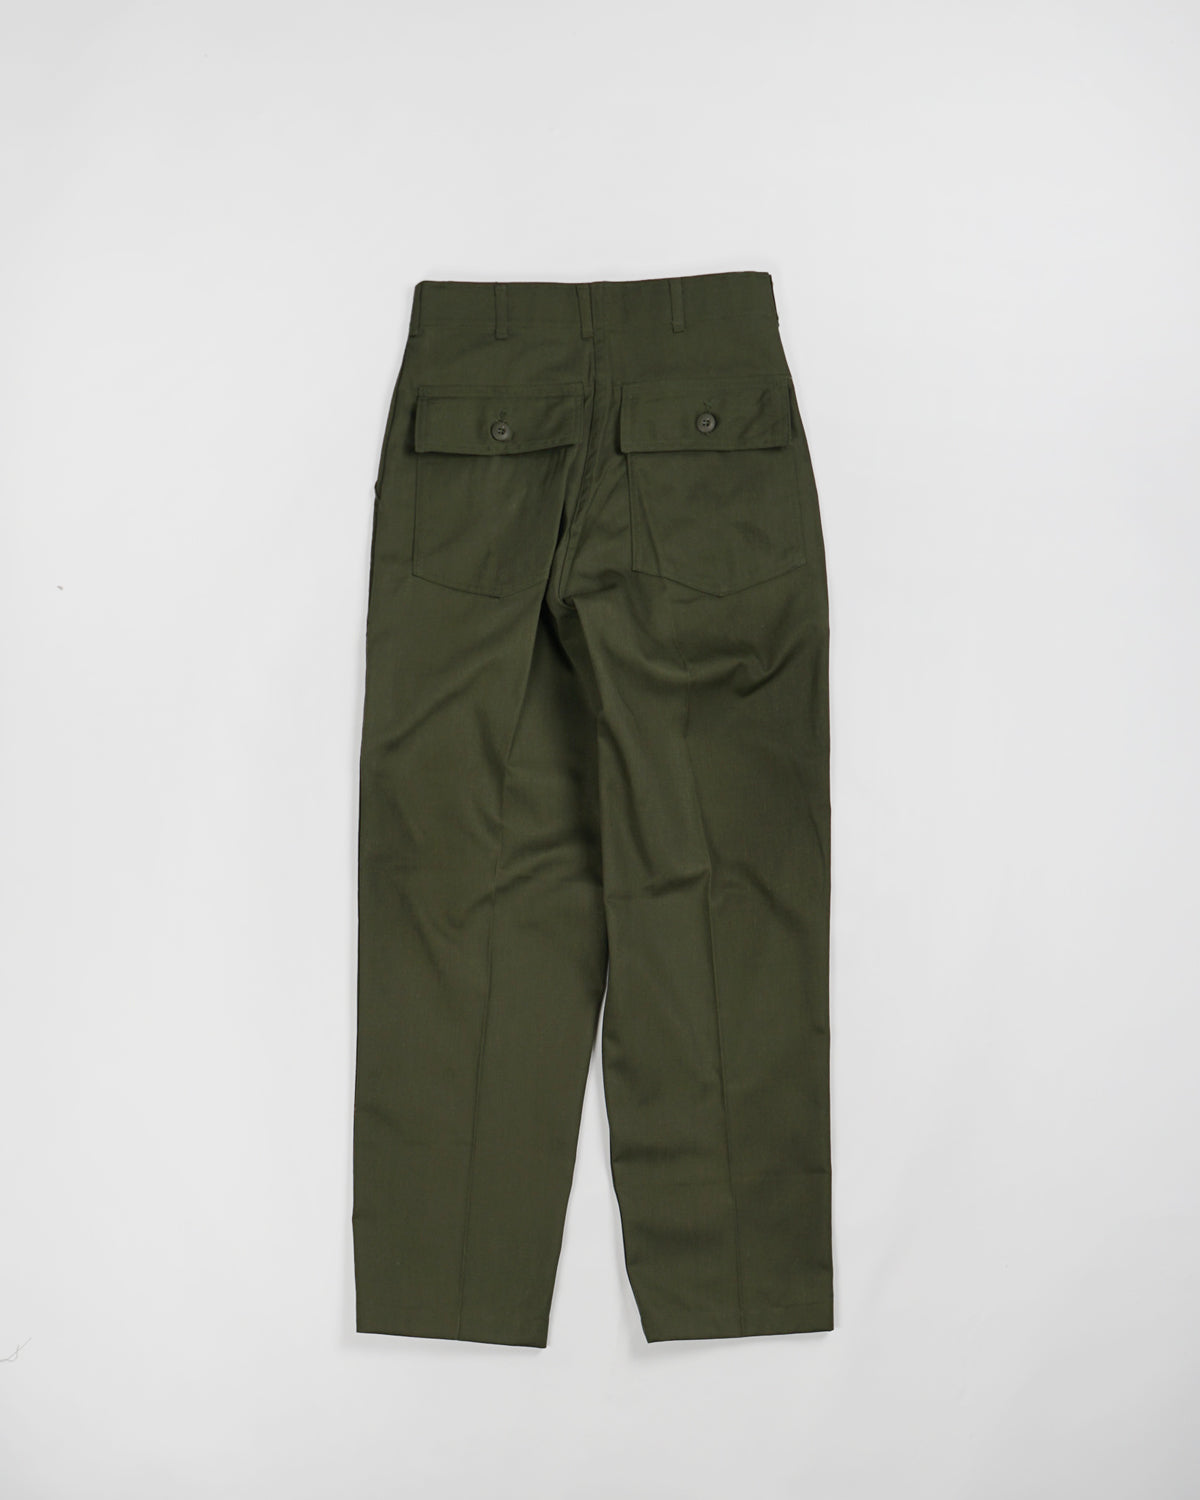 Utility Trousers / Size 29,31